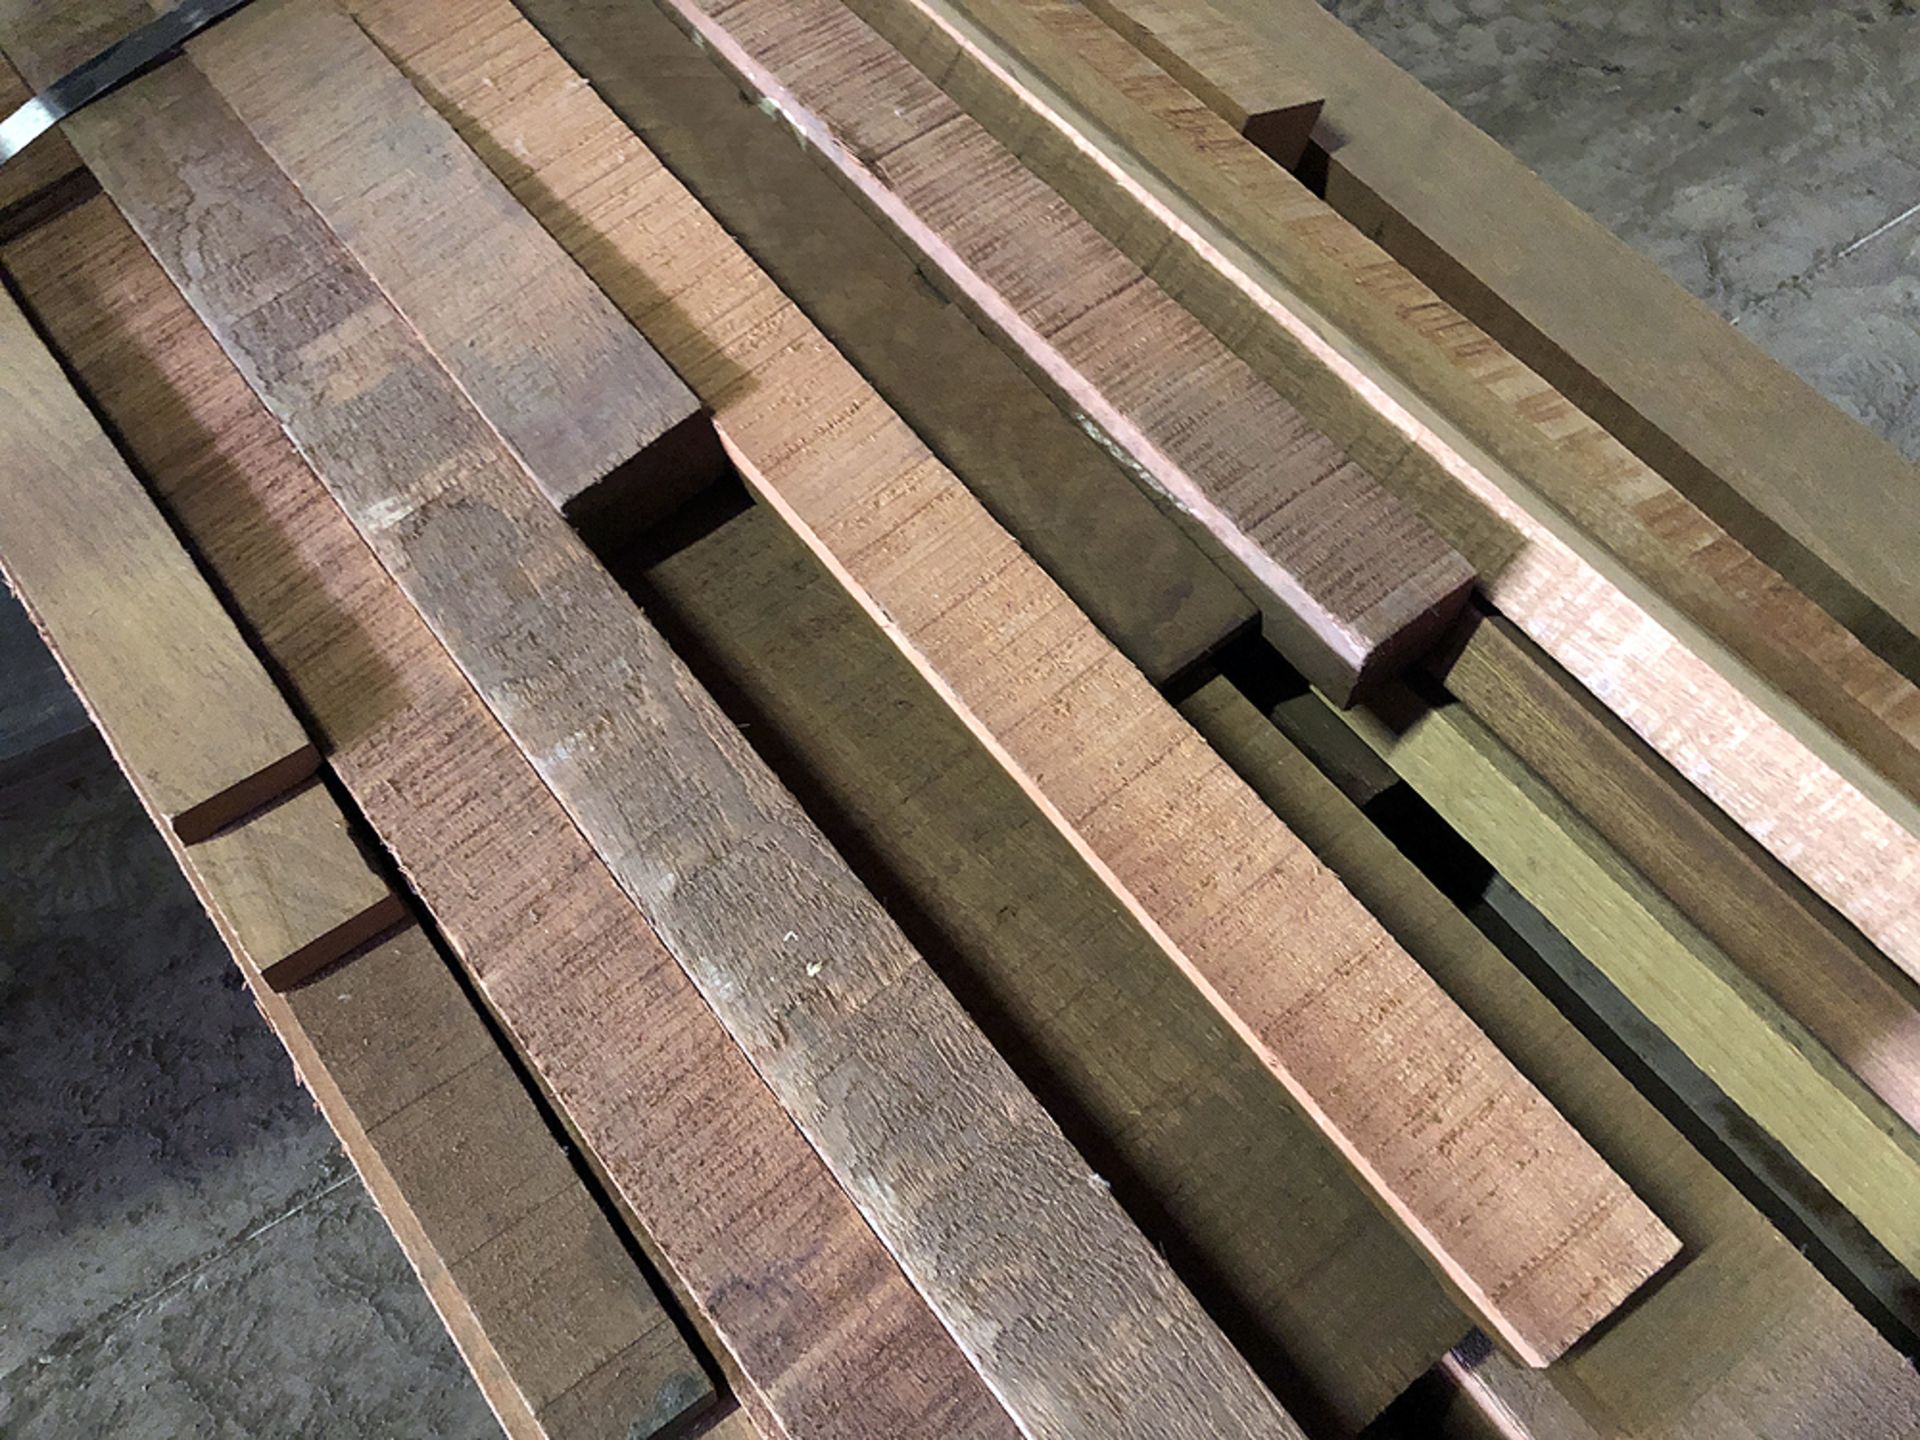 Mahogany Cut-Offs, (200 Board Feet)(Bidding by the lot) - Image 5 of 6